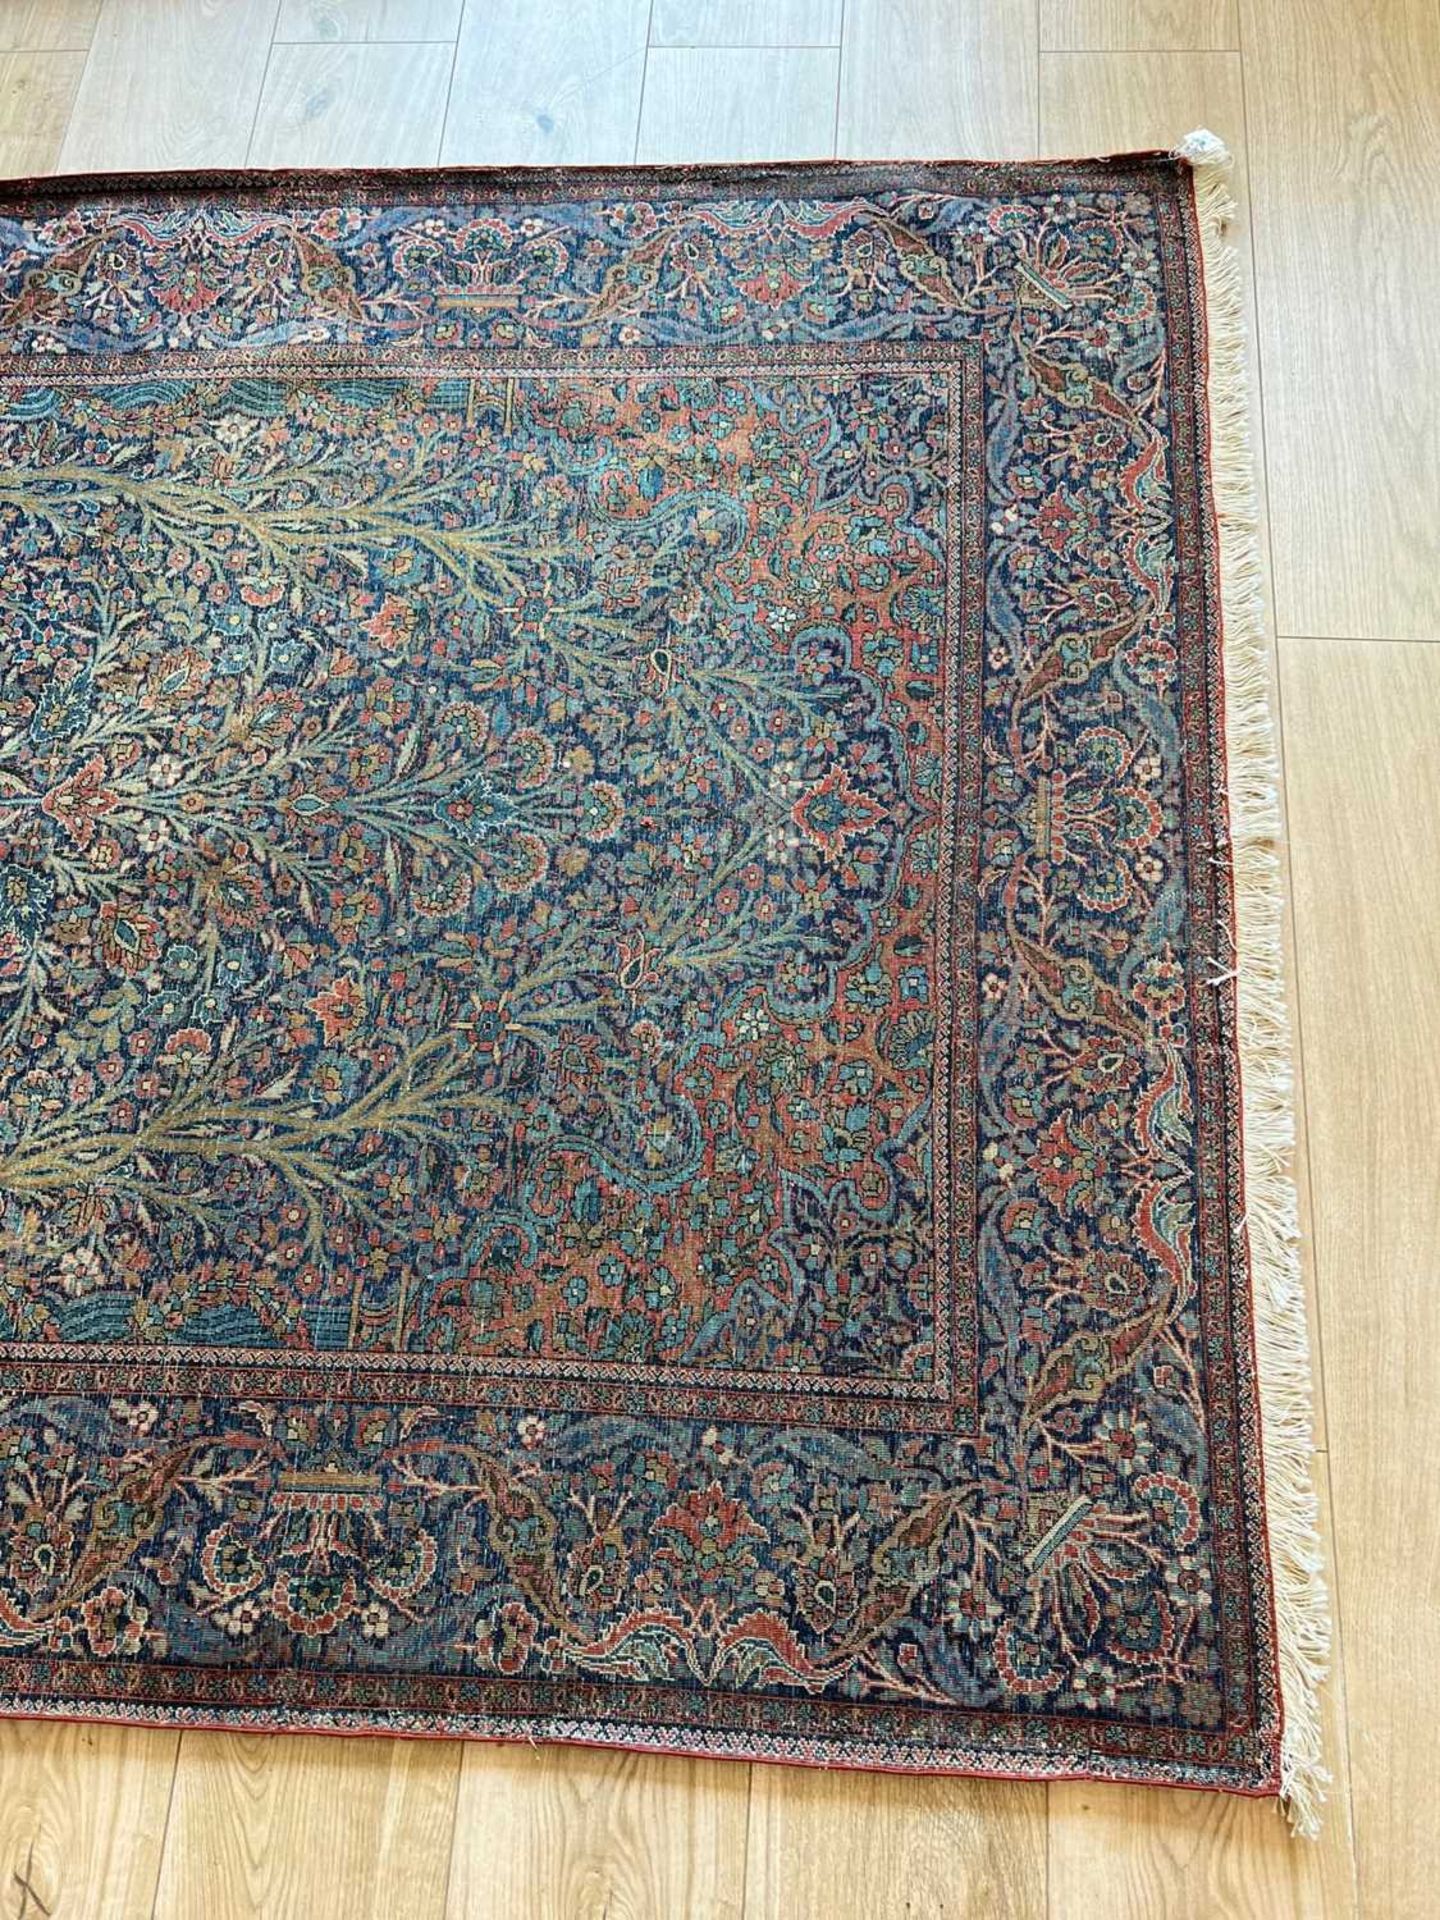 A FINE PAIR OF 1920'S MOHTASHAM KASHAN CARPETS - Image 11 of 38